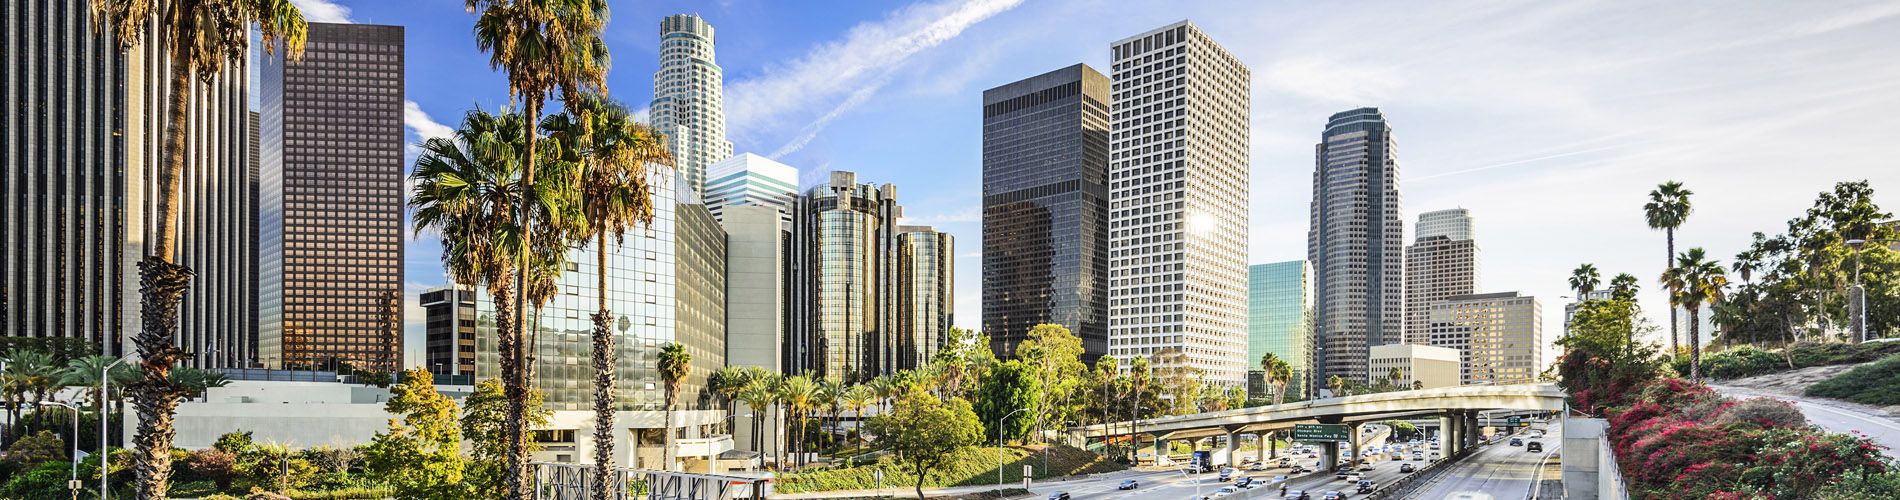 A skyline view of downtown Los Angeles.